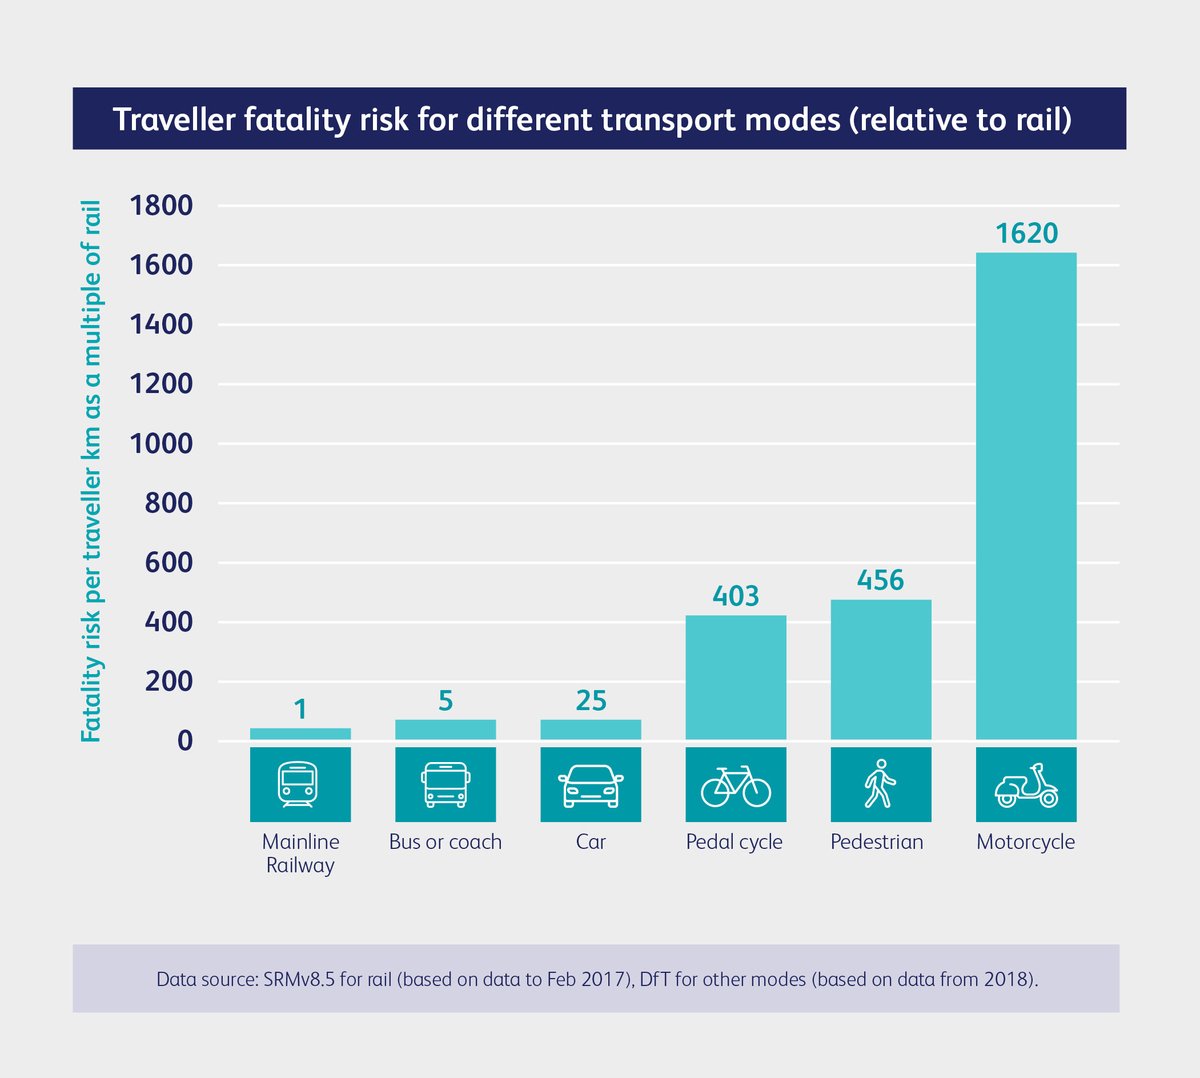 Rail is much safer than road. Some of you may be familiar with this chart, which shows the fatality risk per kilometre travelled for different modes of transport relative to rail.